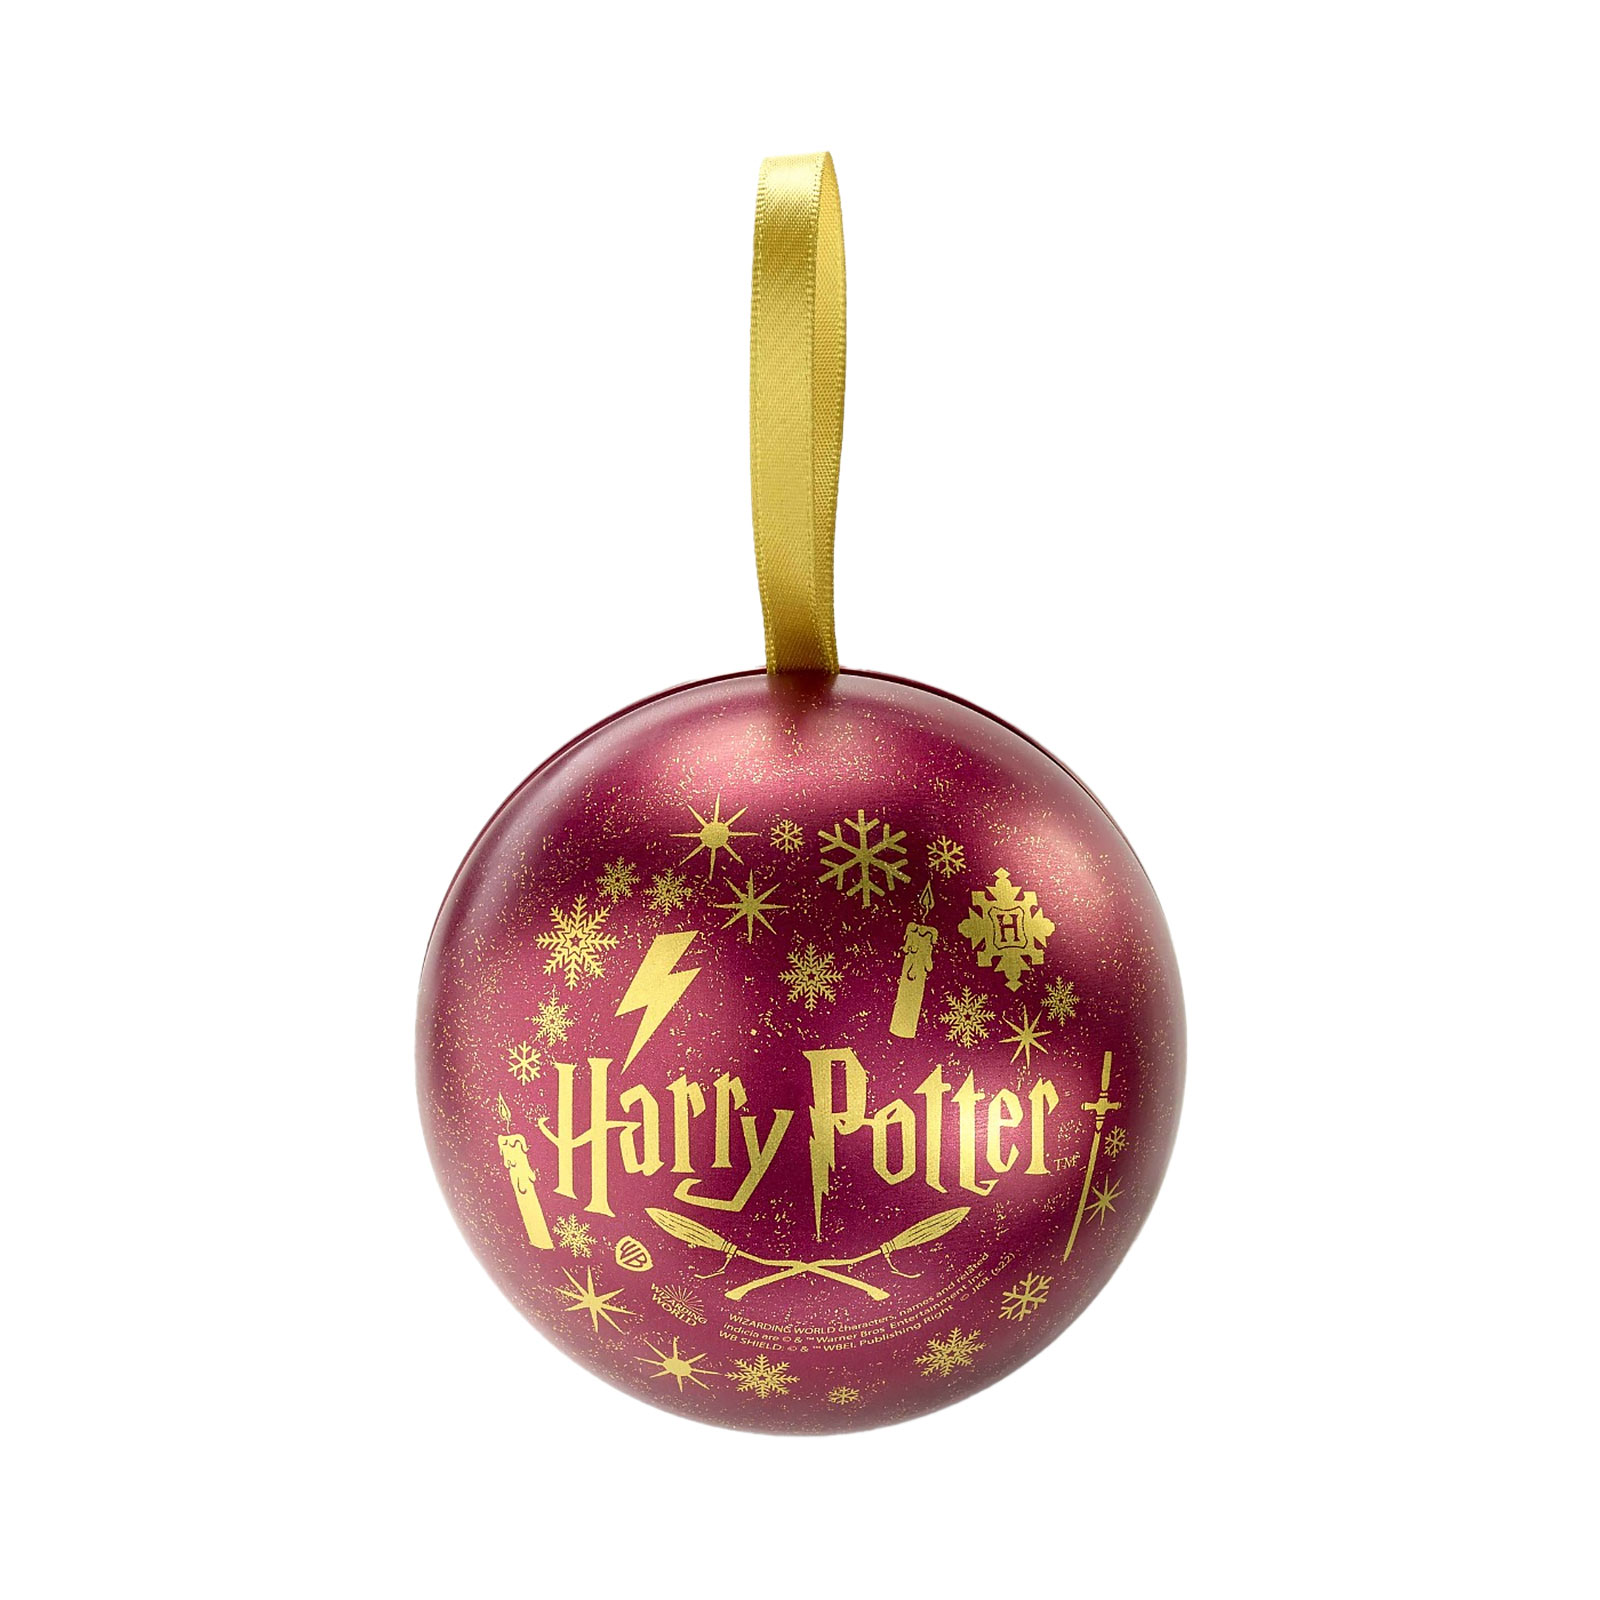 Harry Potter - Christmas ball with Gryffindor crest necklace